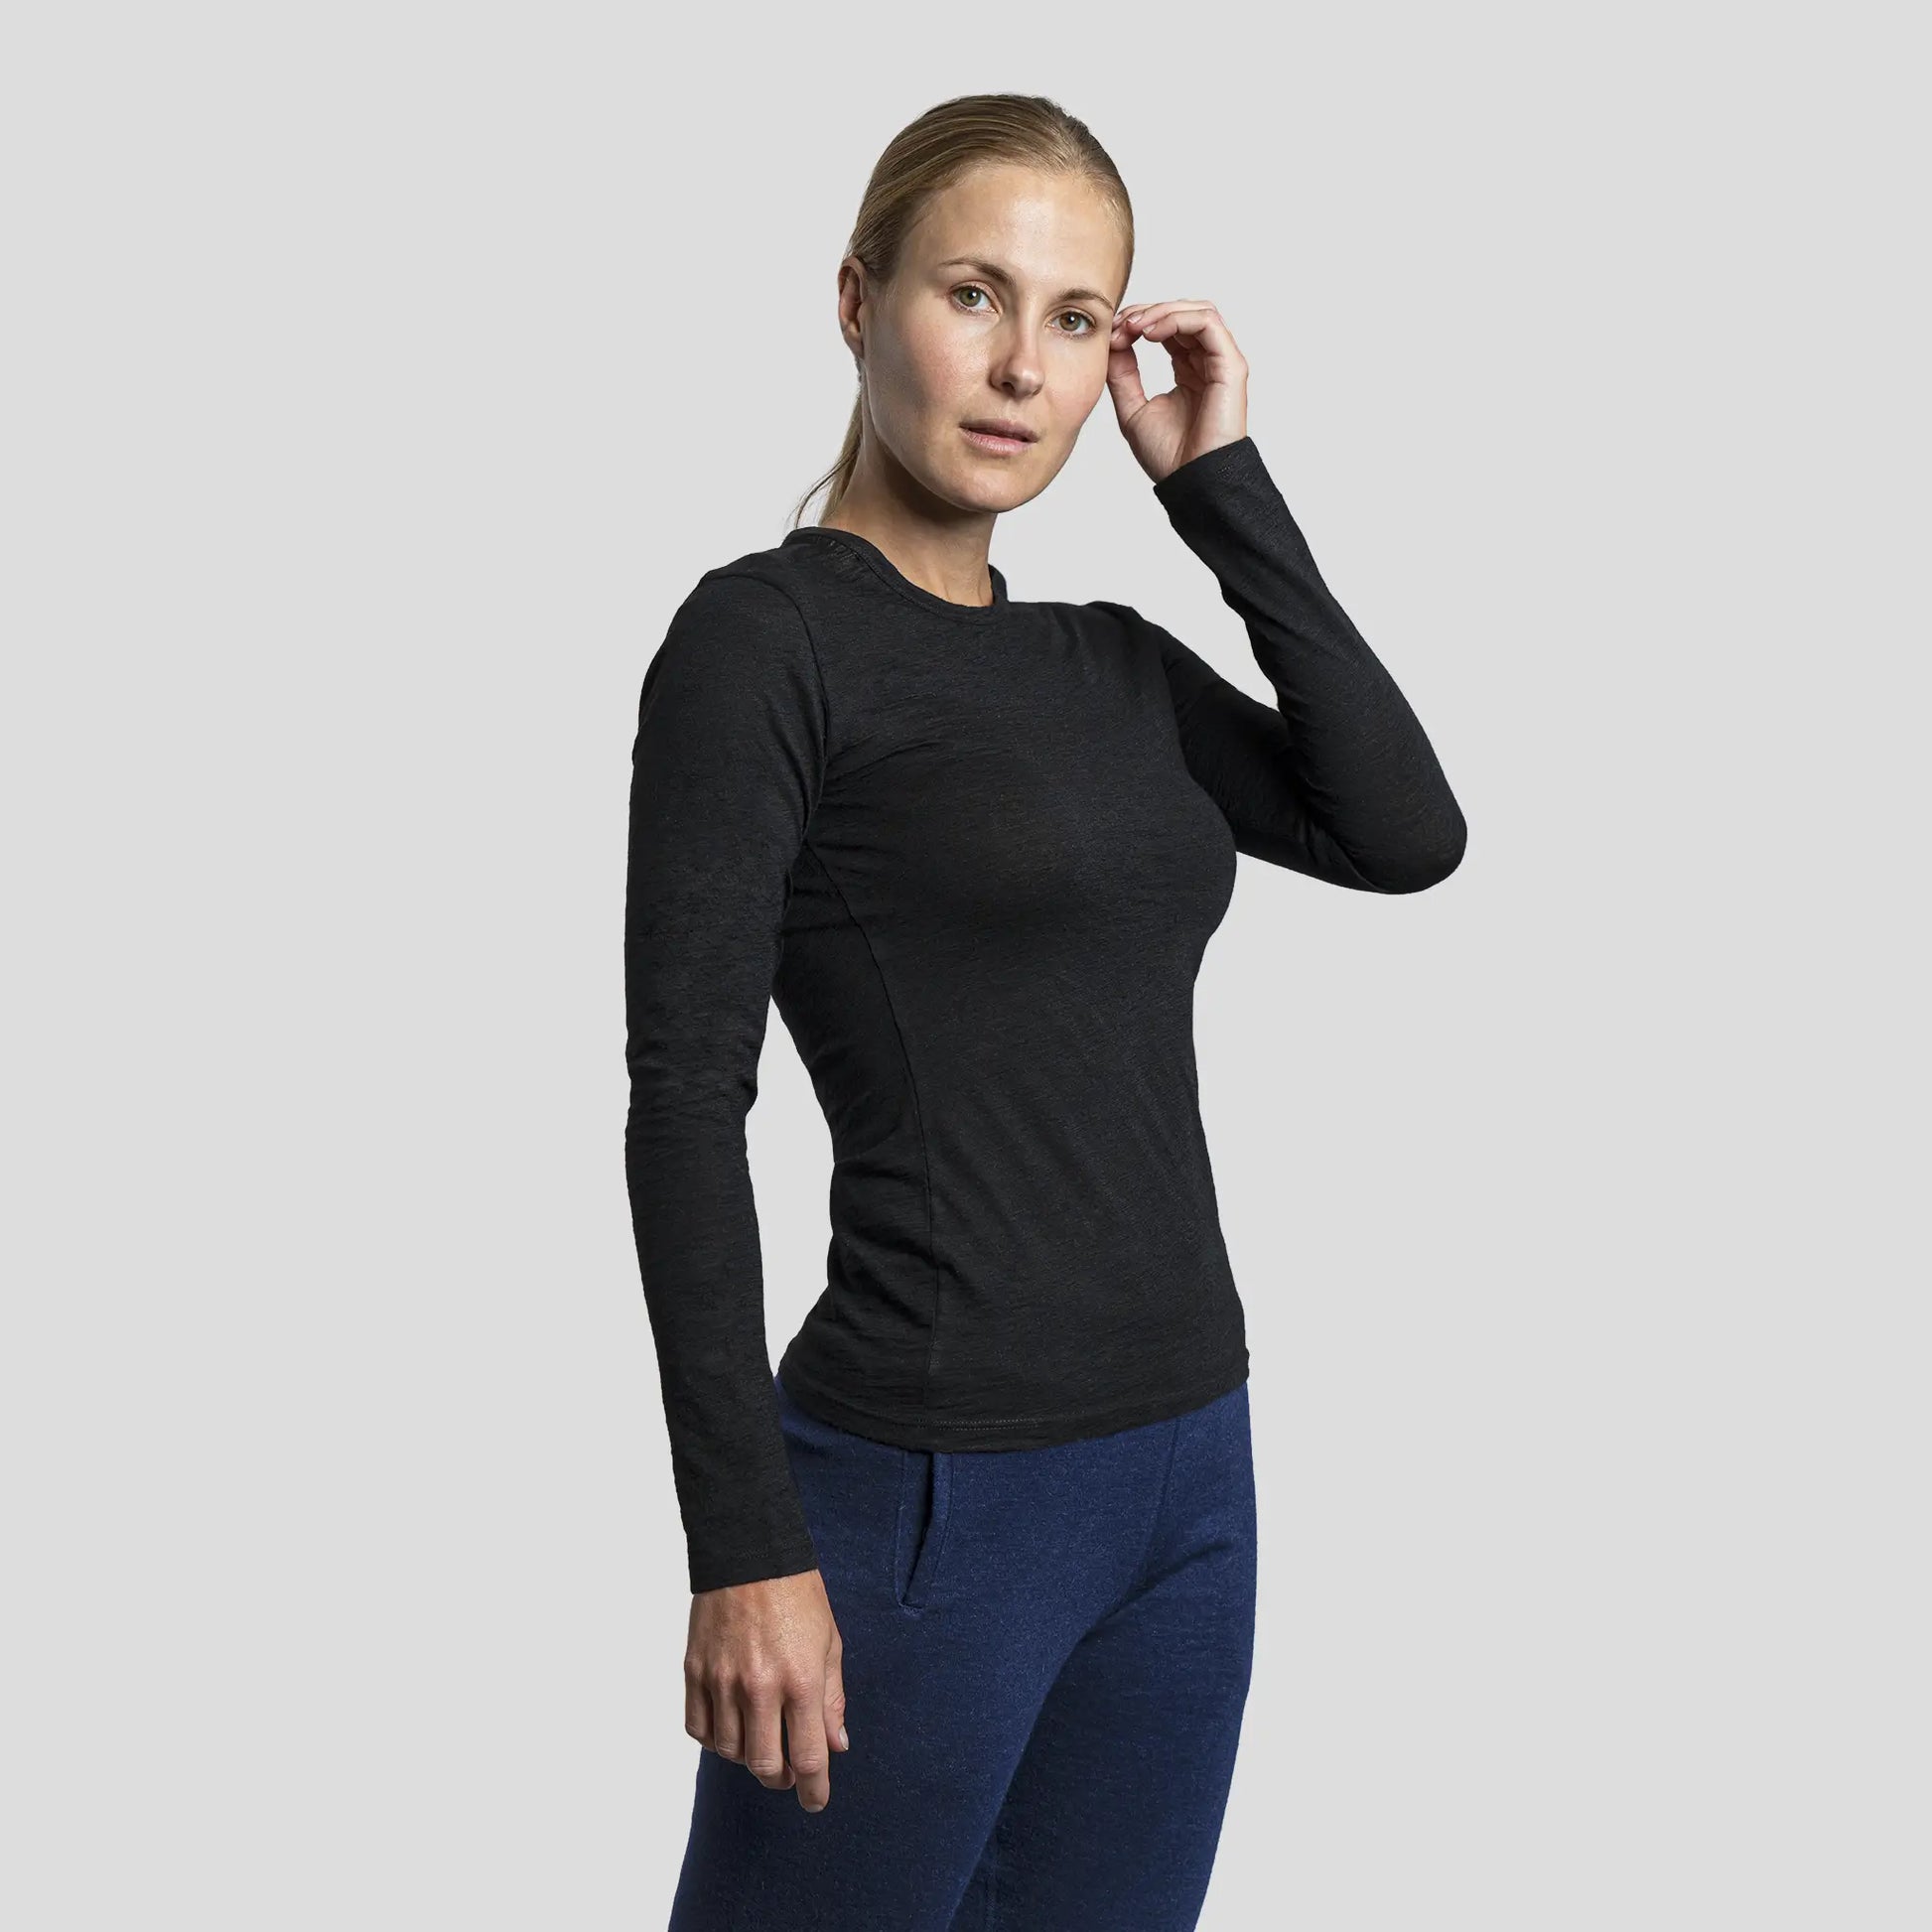 RP Collections Womens Extra Warm Thermal Underwear Long Jane